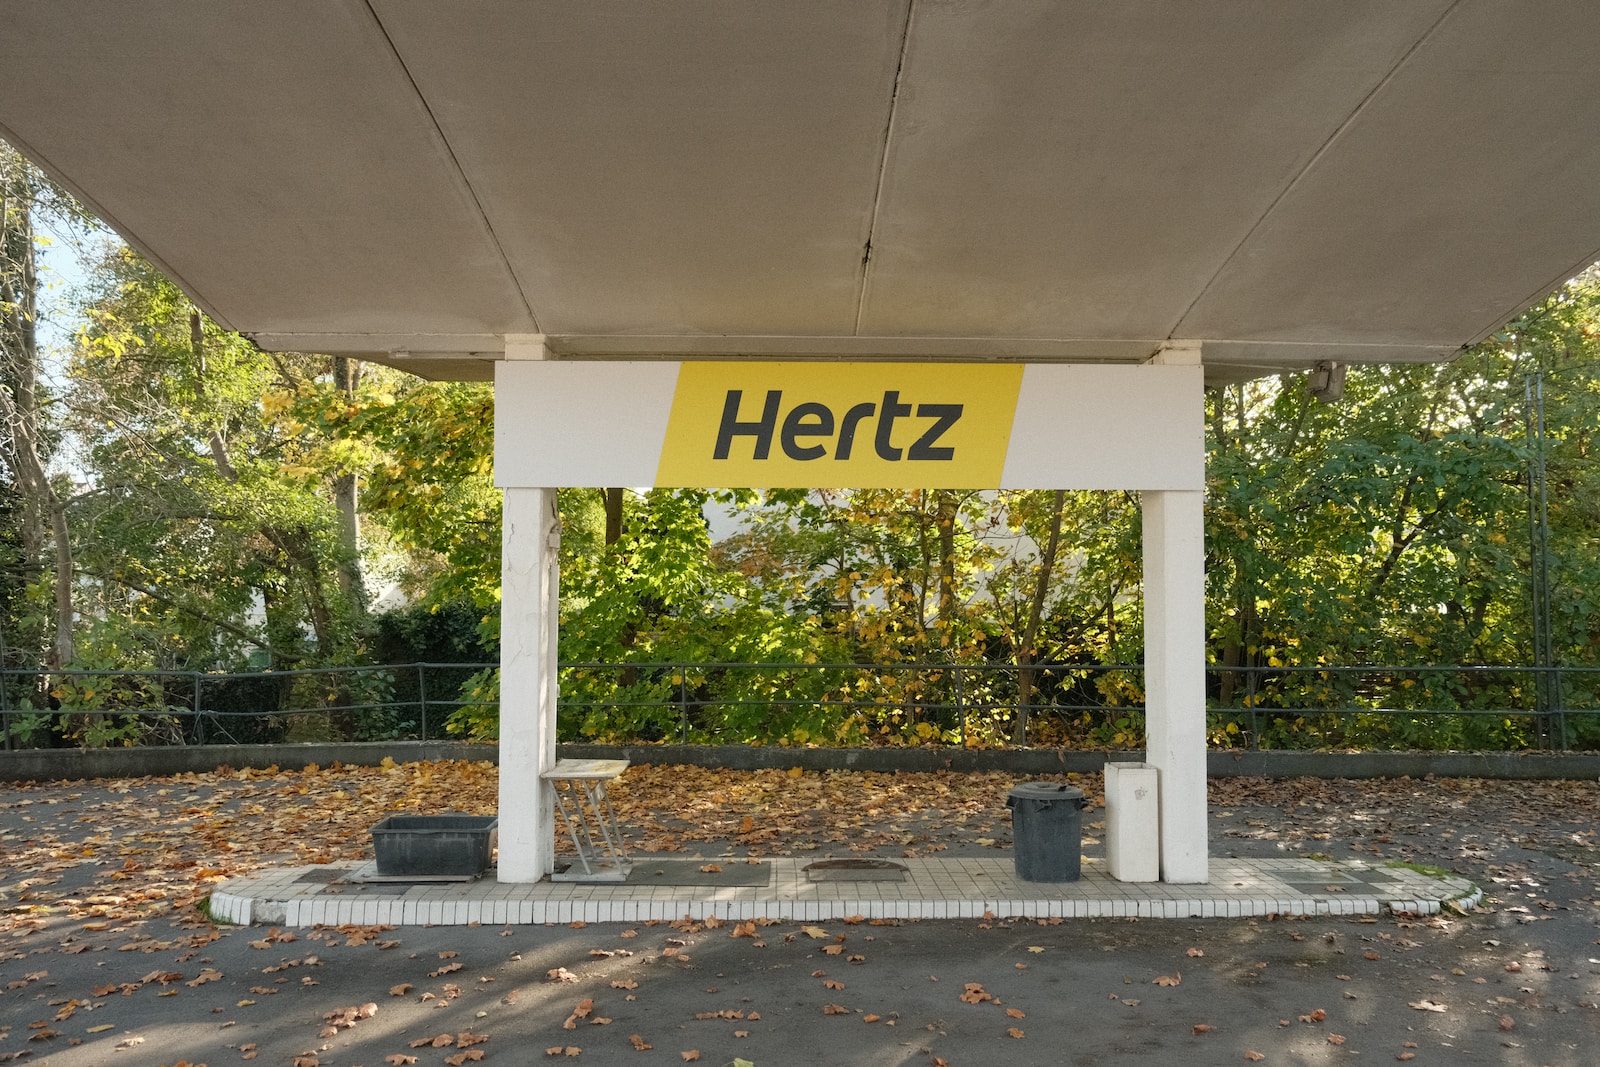 a hertz sign on a covered area